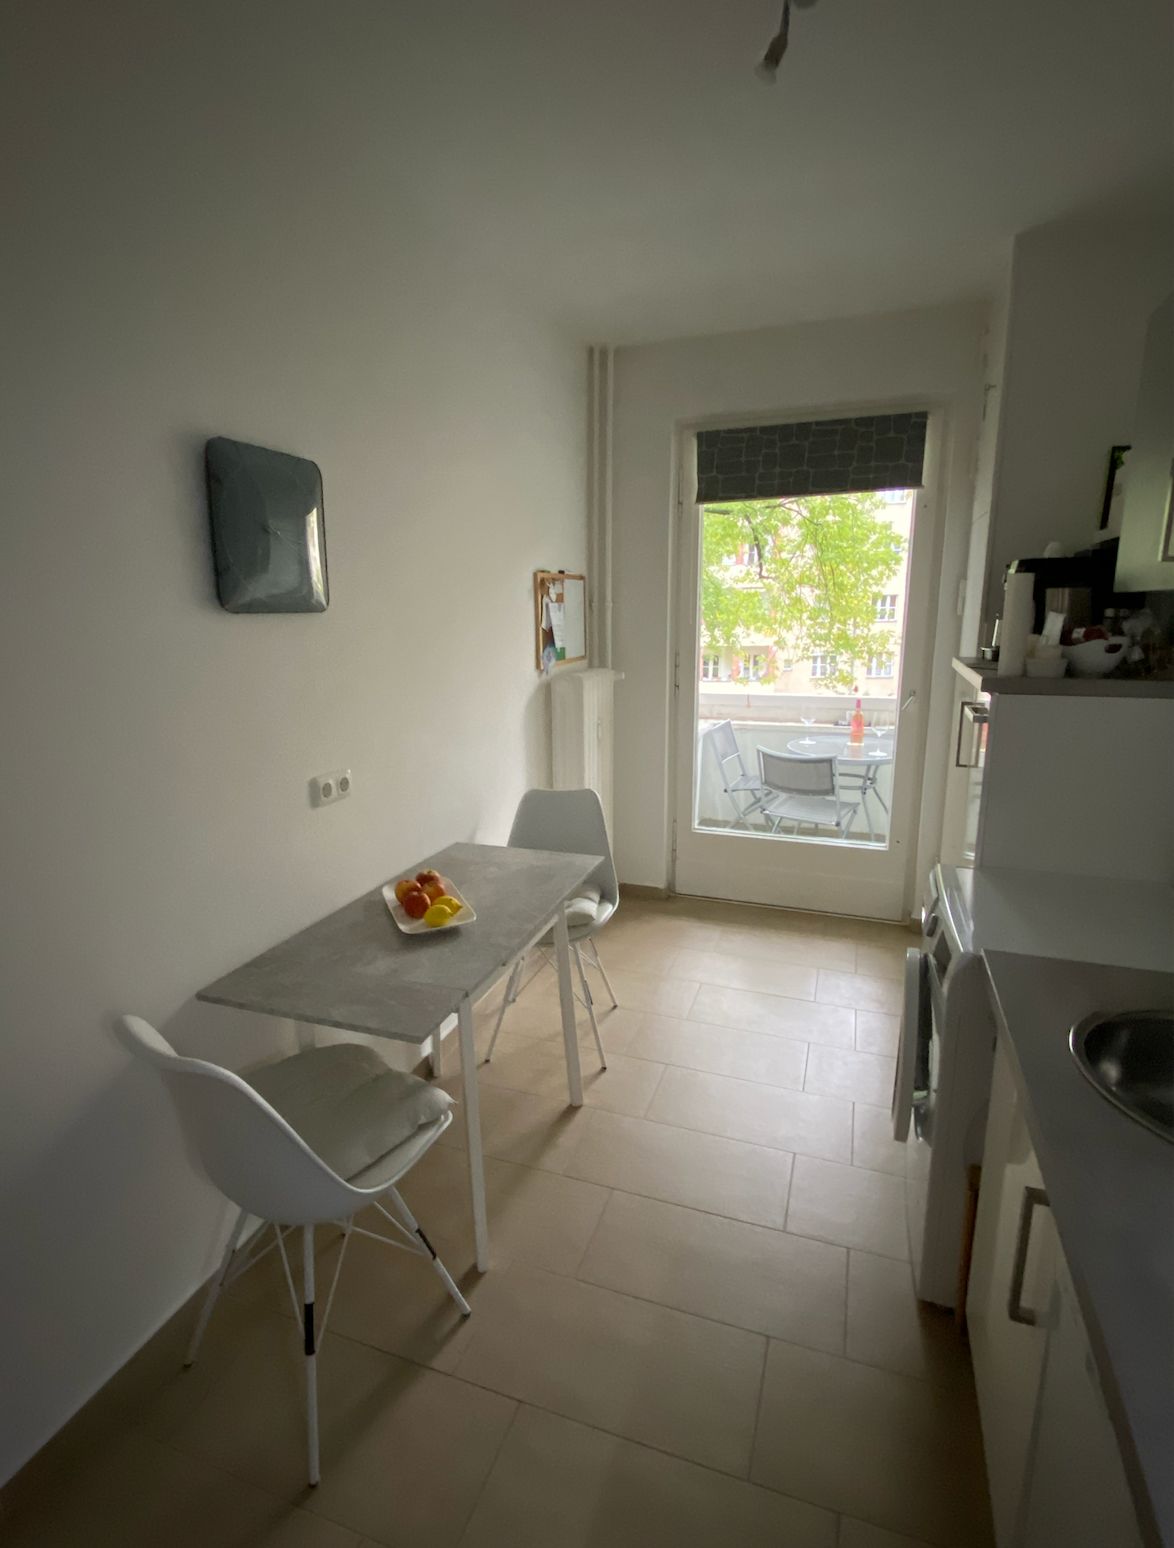 Attractive 2-room apartment in the heart of Berlin.